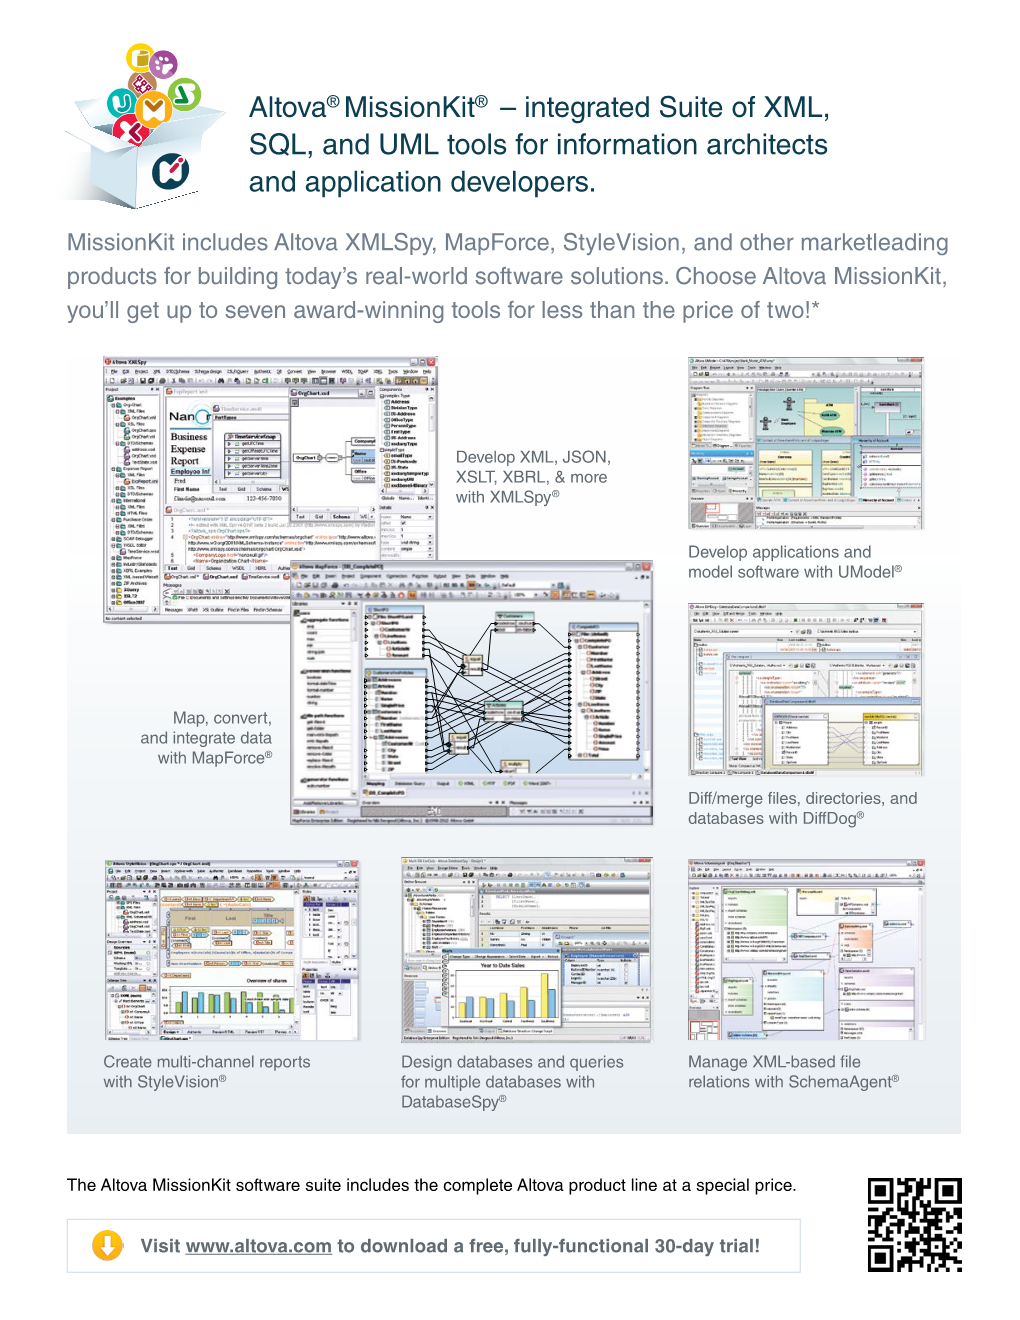 Altova® Missionkit® – Integrated Suite of XML, SQL, and UML Tools for Information Architects and Application Developers